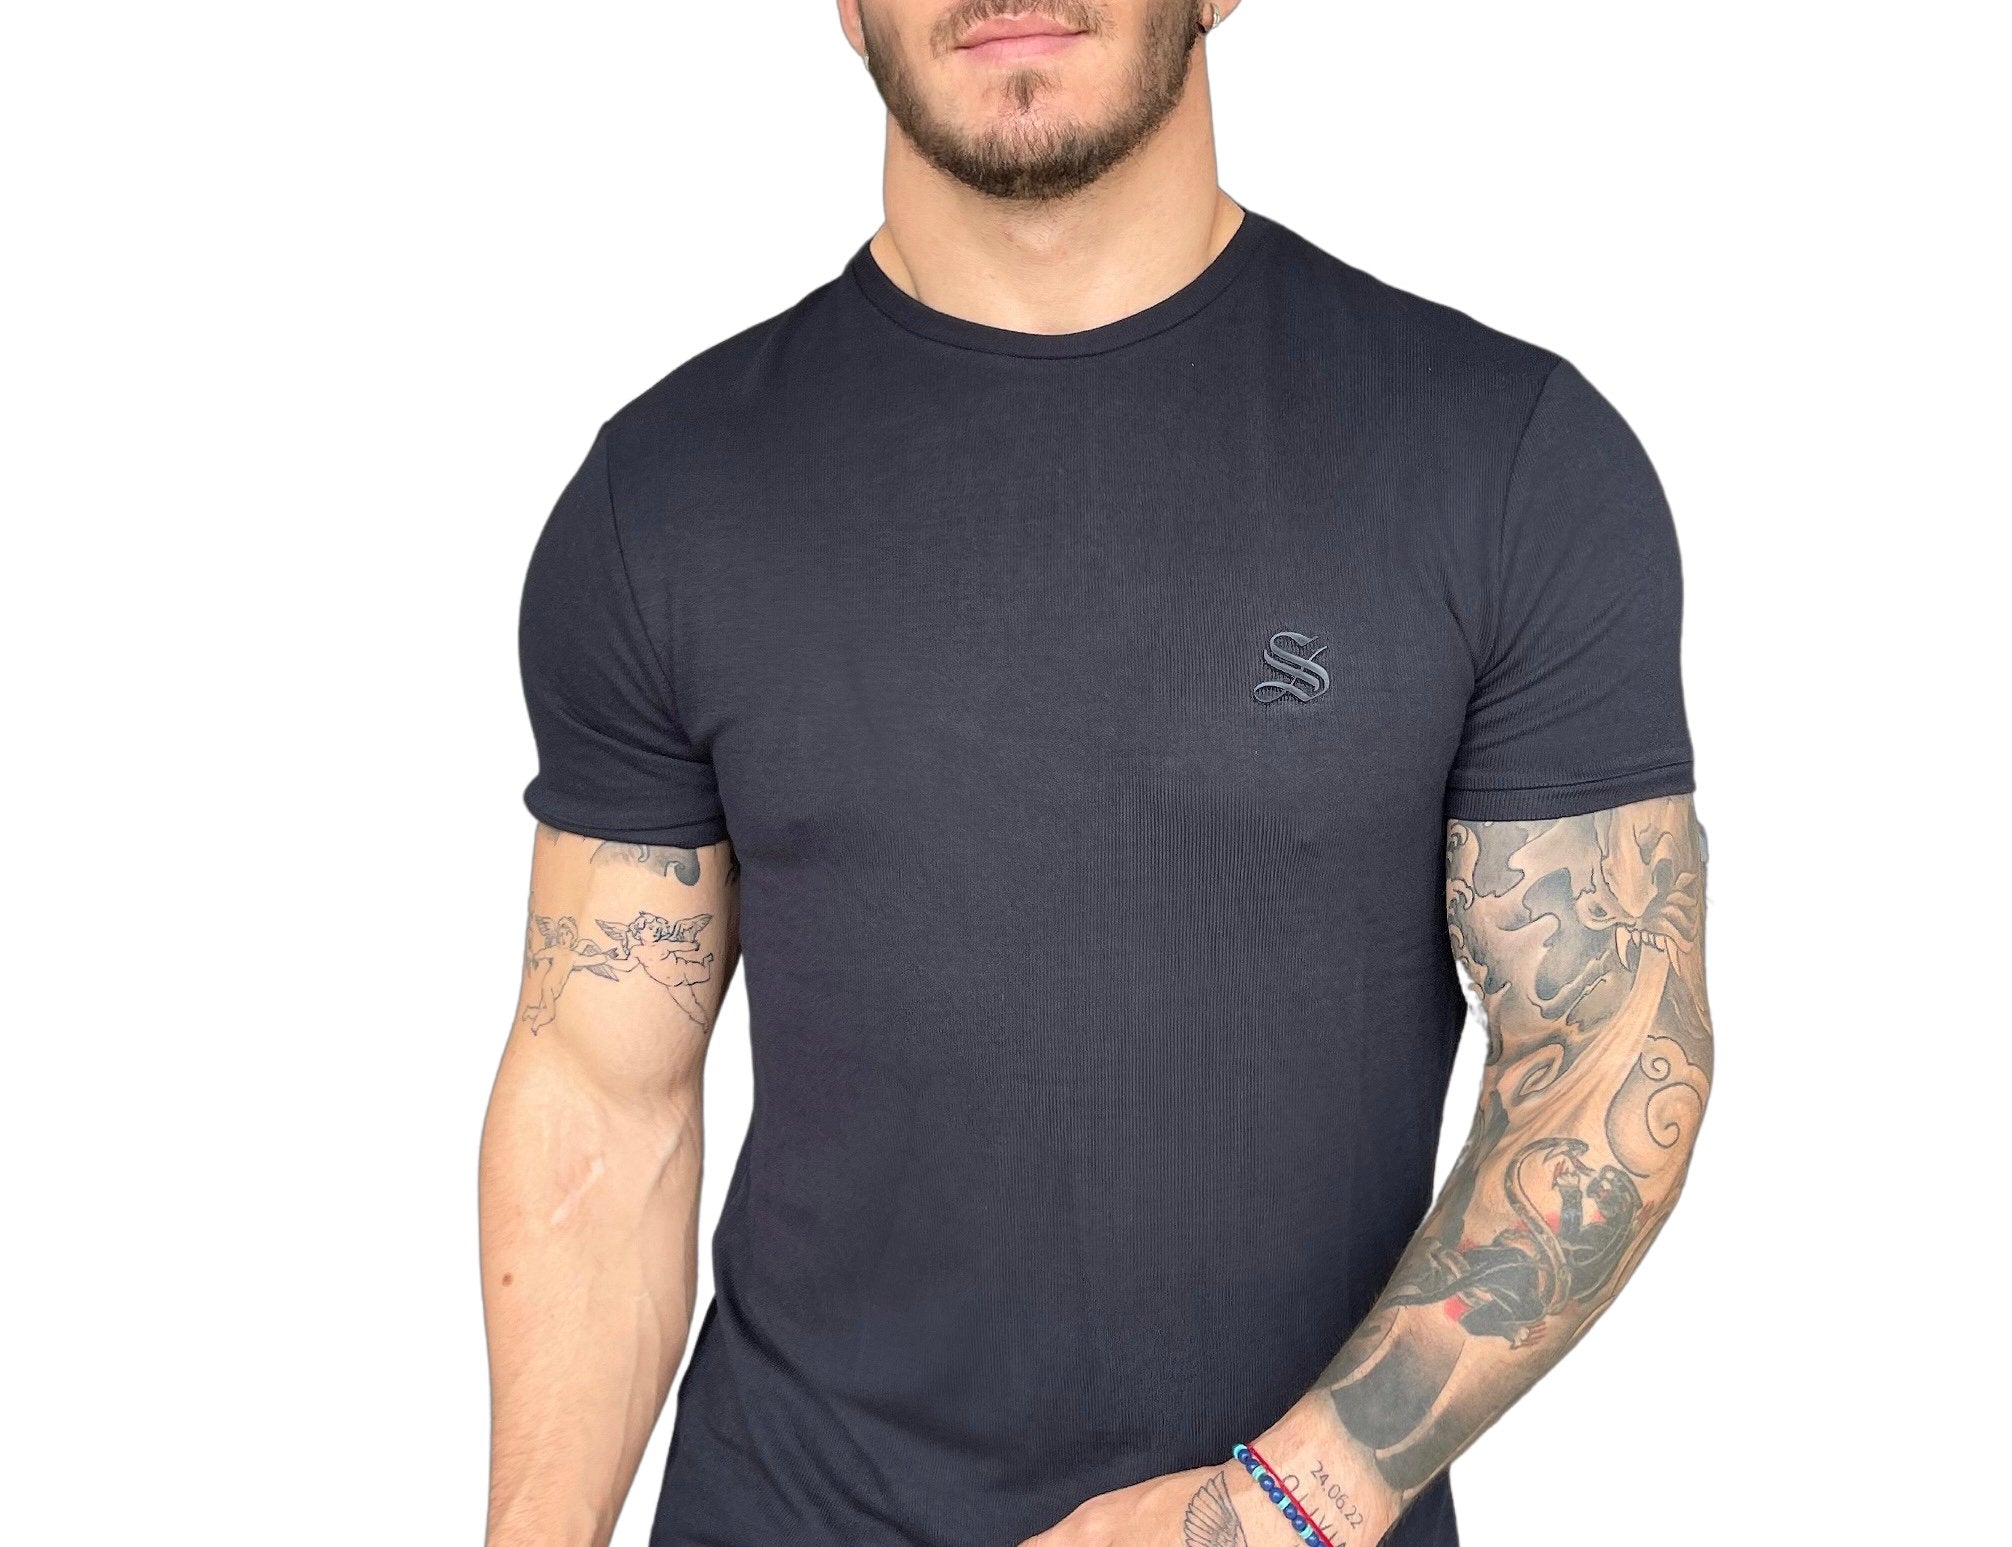 RotterDam - Black T-Shirt for Men (PRE-ORDER DISPATCH DATE 15 APRIL 2023) - Sarman Fashion - Wholesale Clothing Fashion Brand for Men from Canada